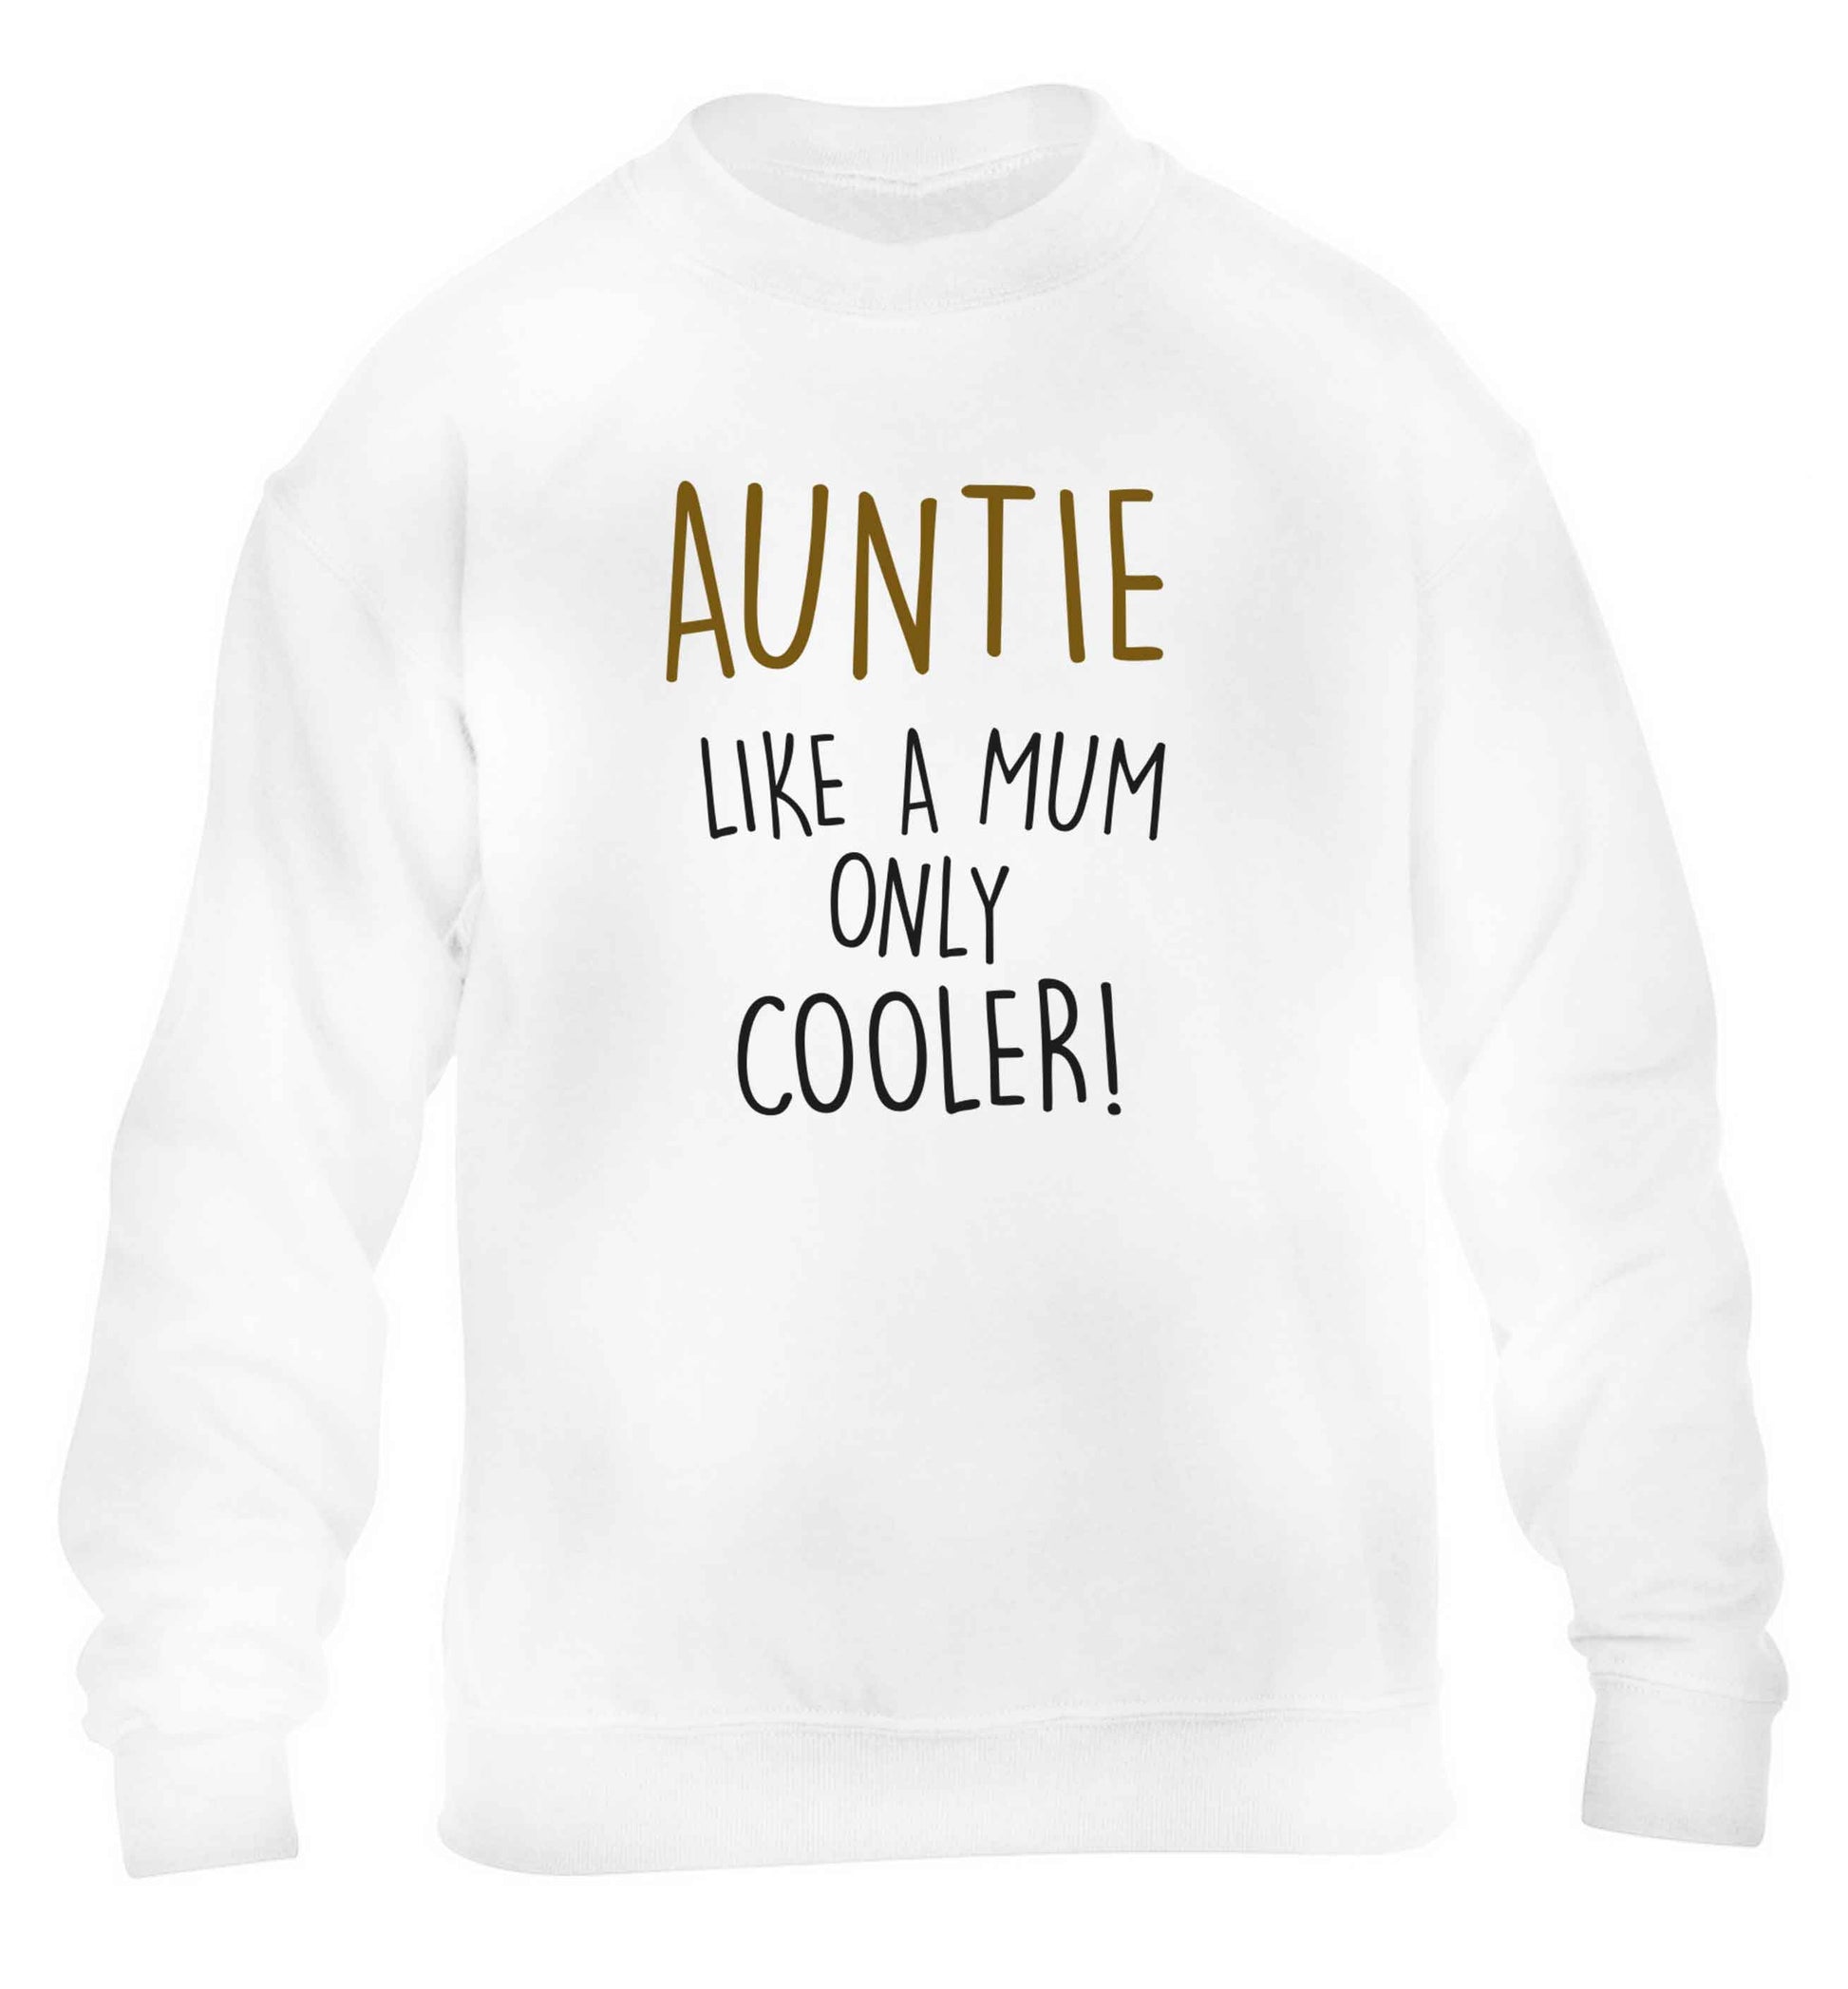 Auntie like a mum only cooler children's white sweater 12-13 Years